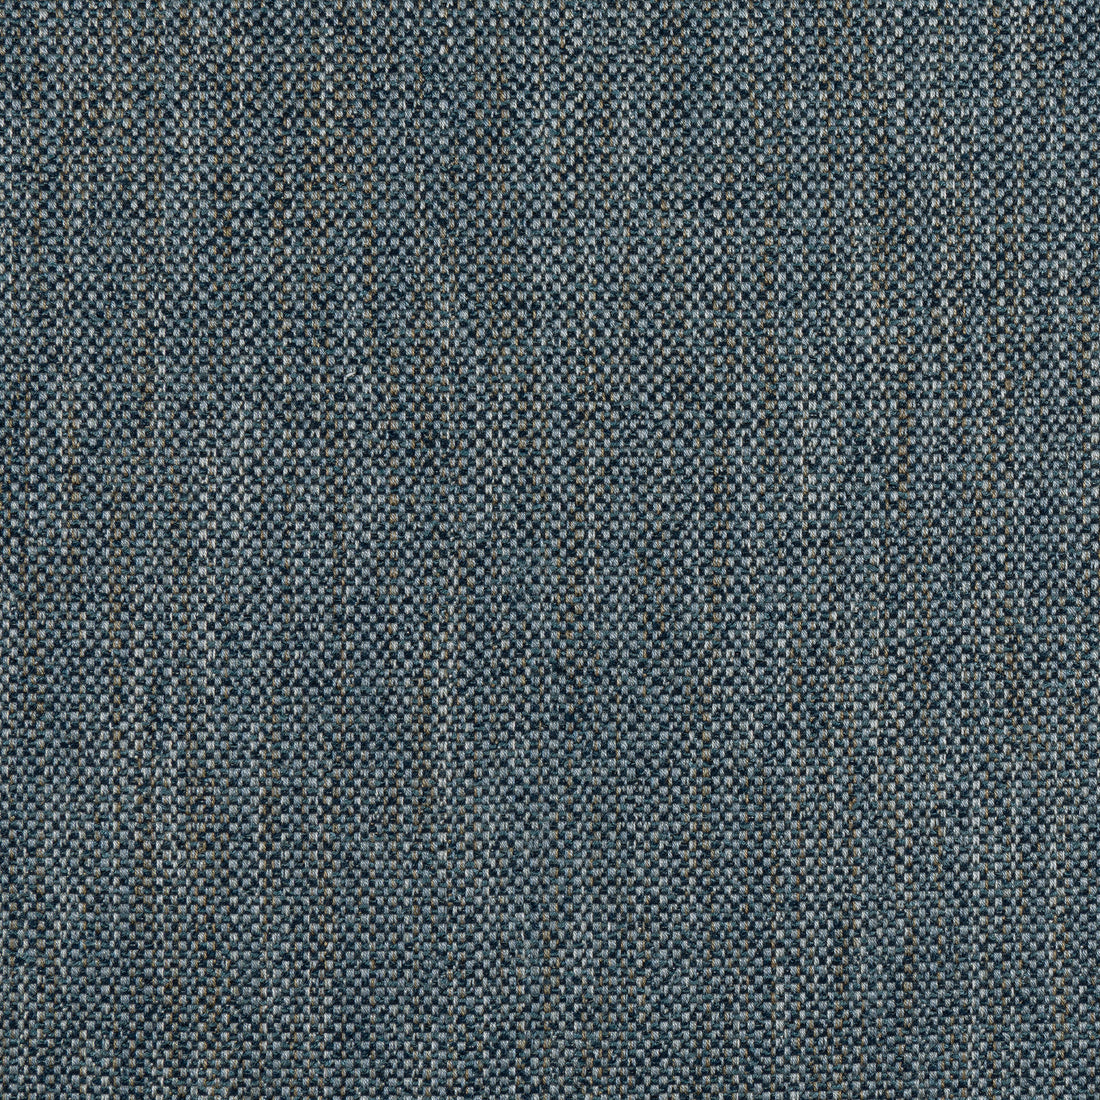 Tinta fabric in indigo color - pattern number W8135 - by Thibaut in the Sereno collection